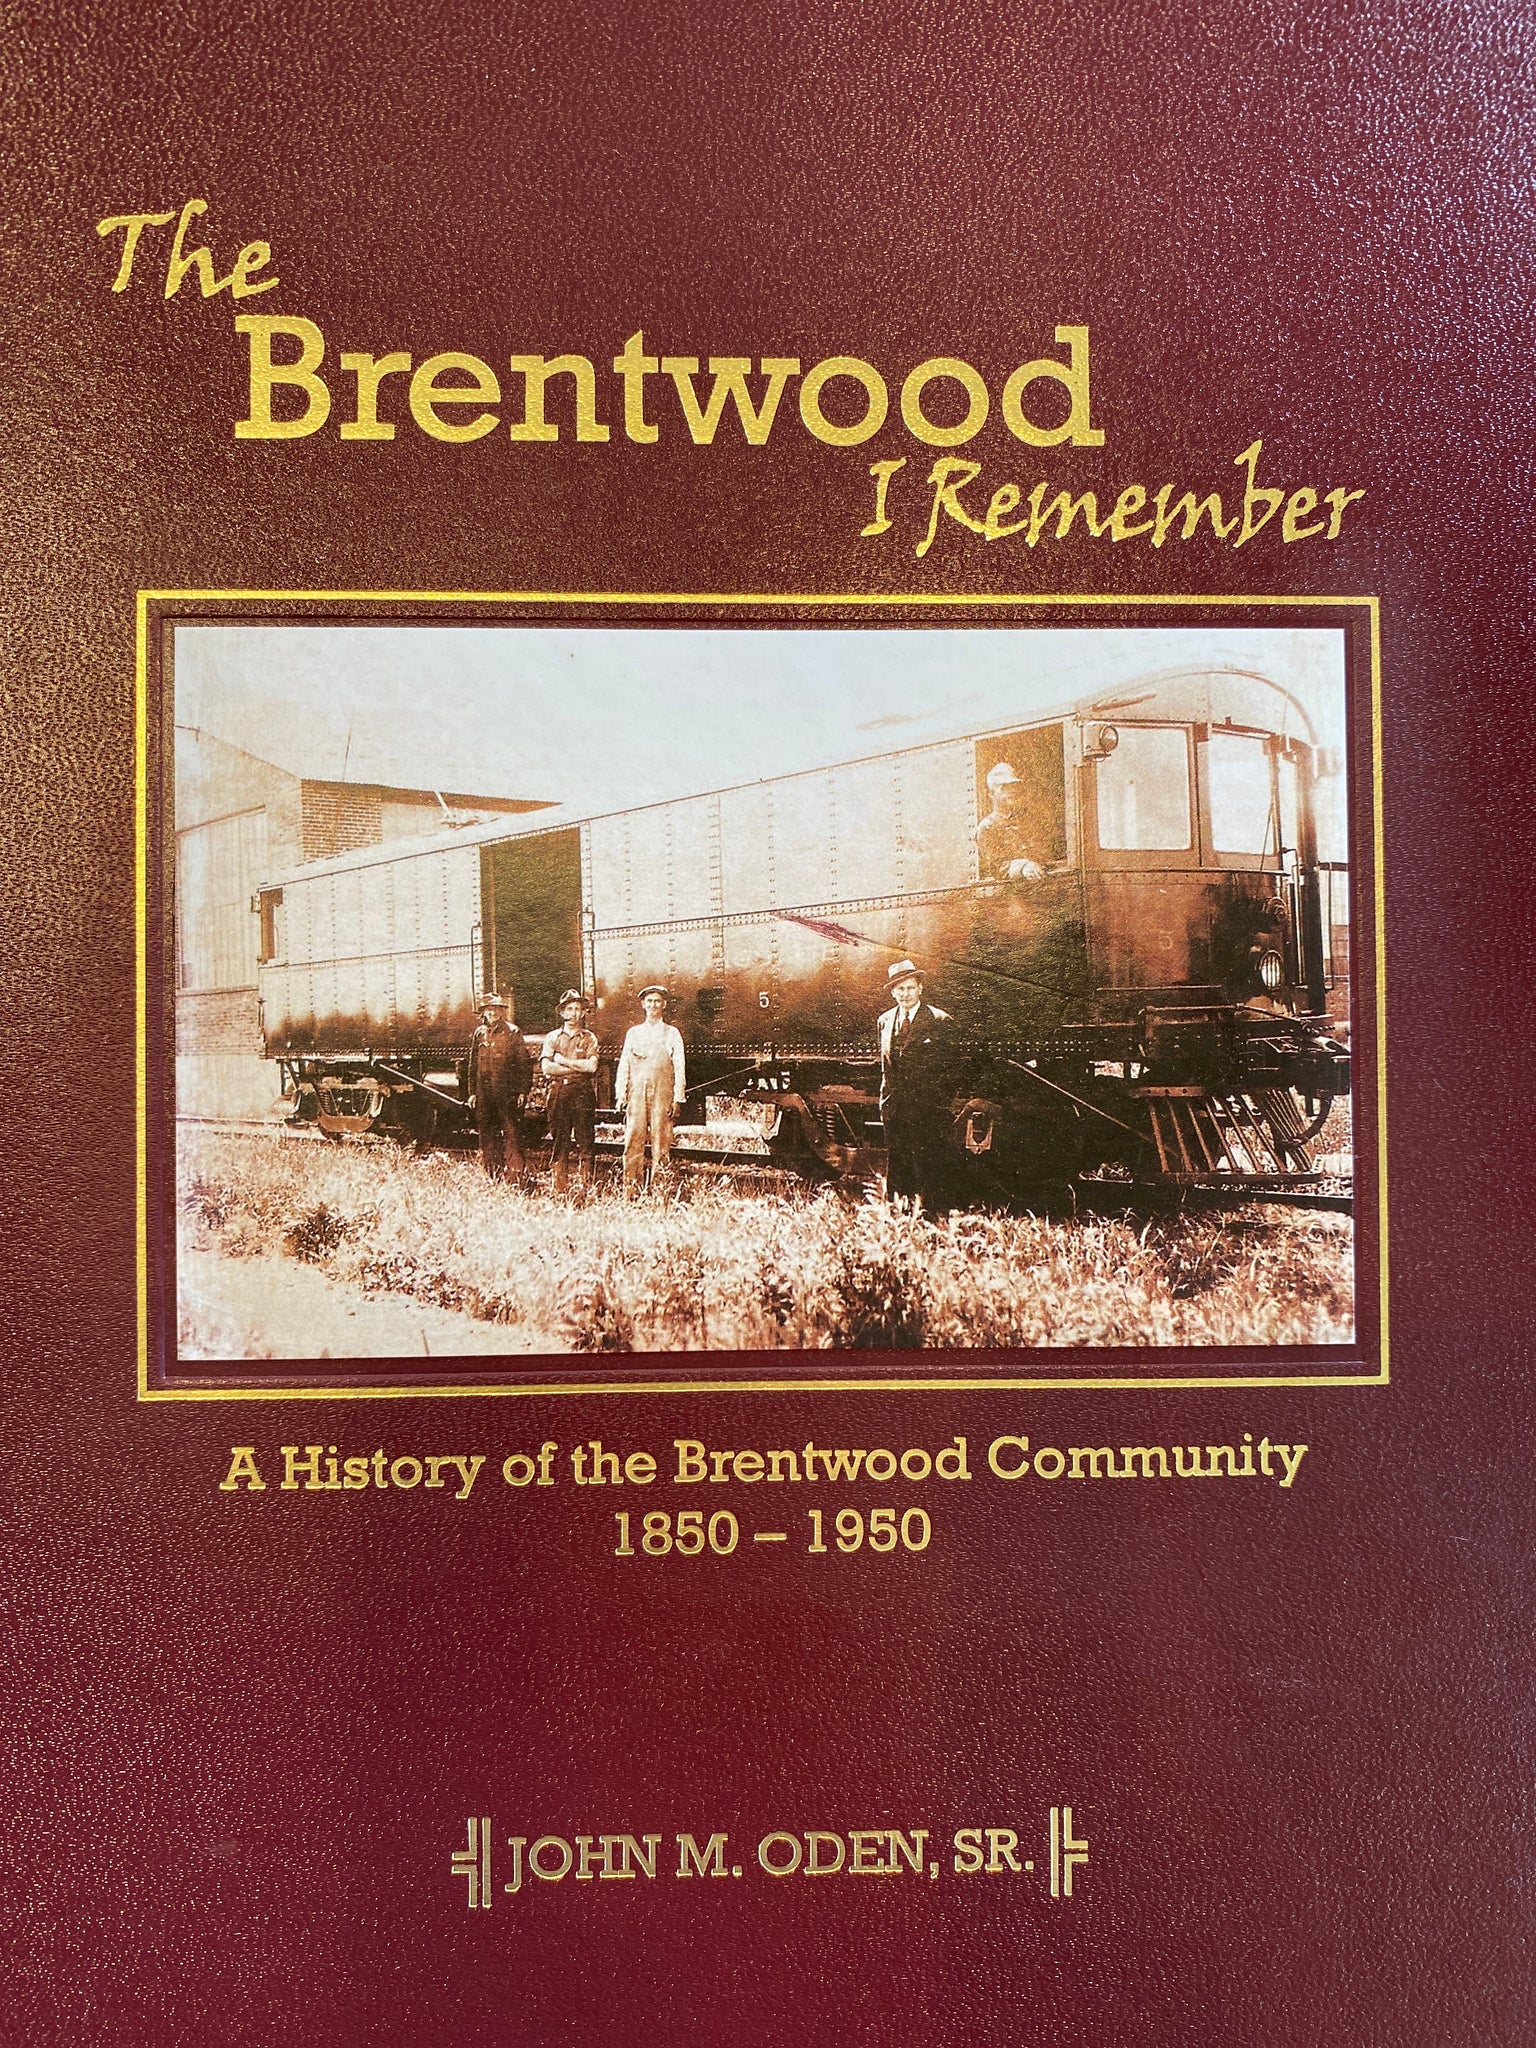 The Brentwood I Remember